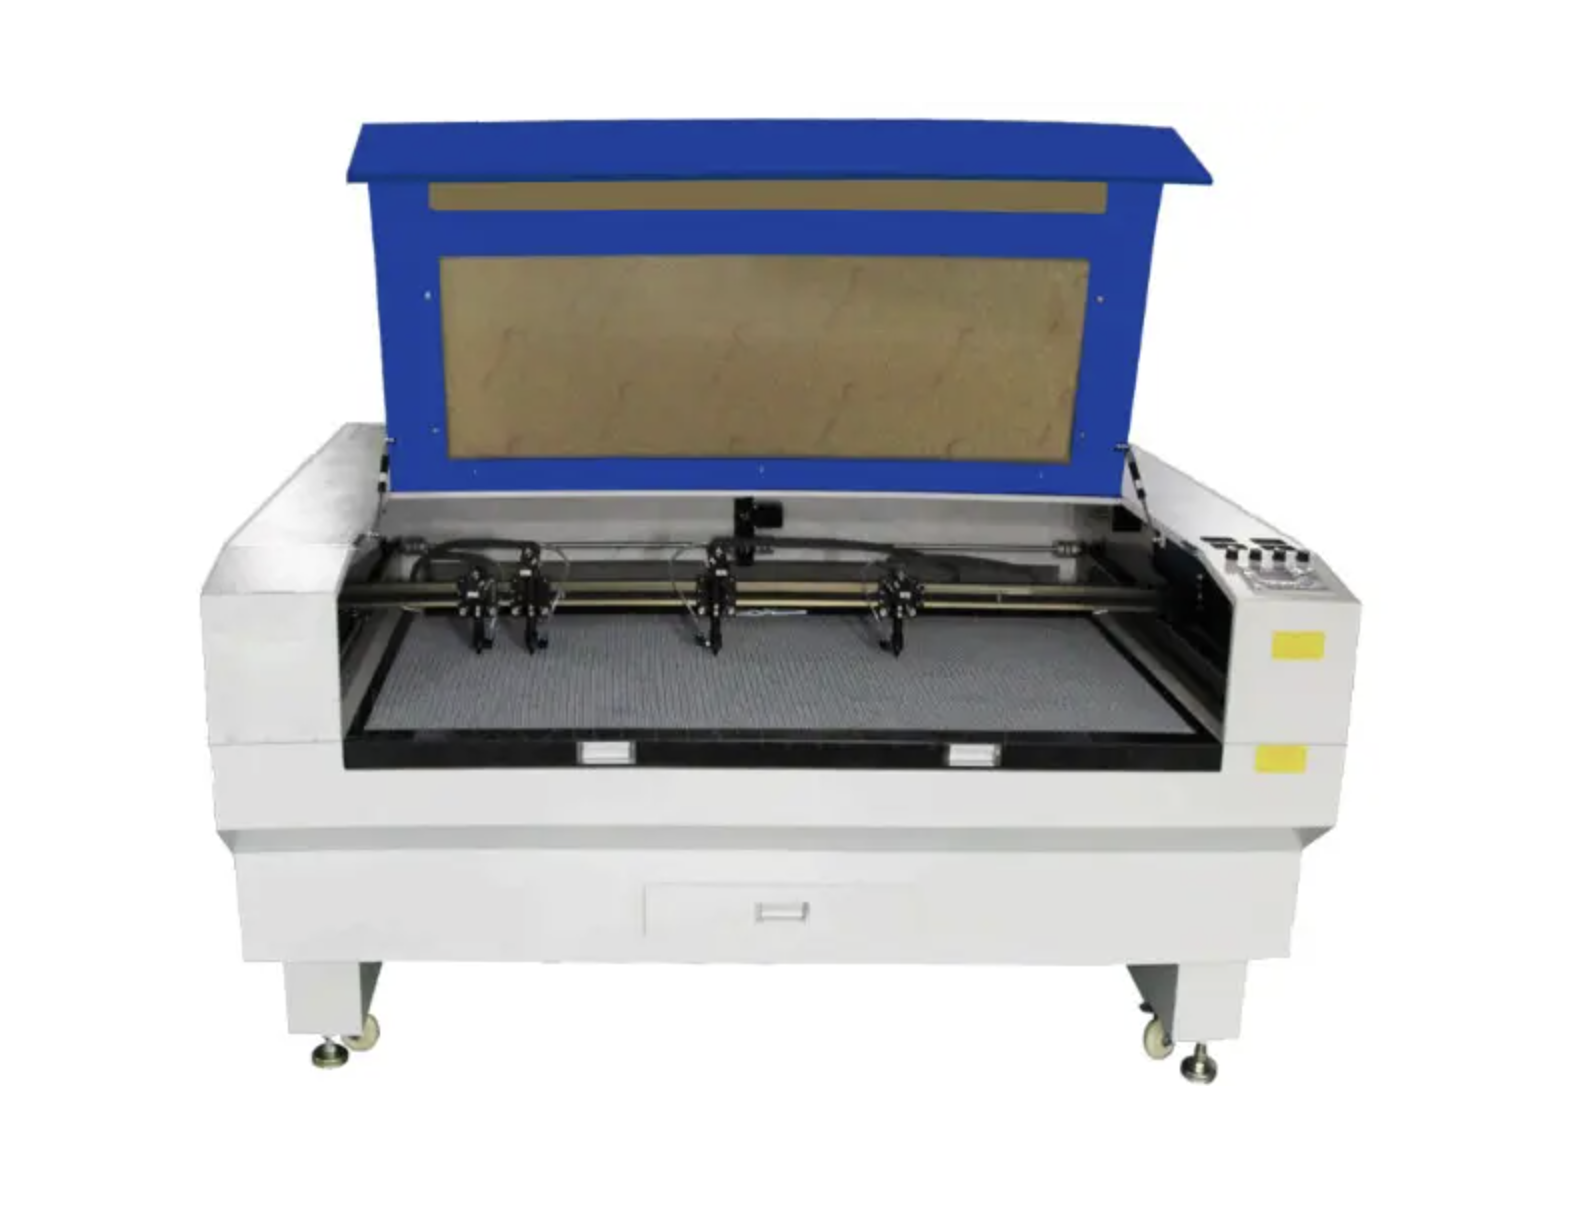 Can the laser cutting machine work continuously